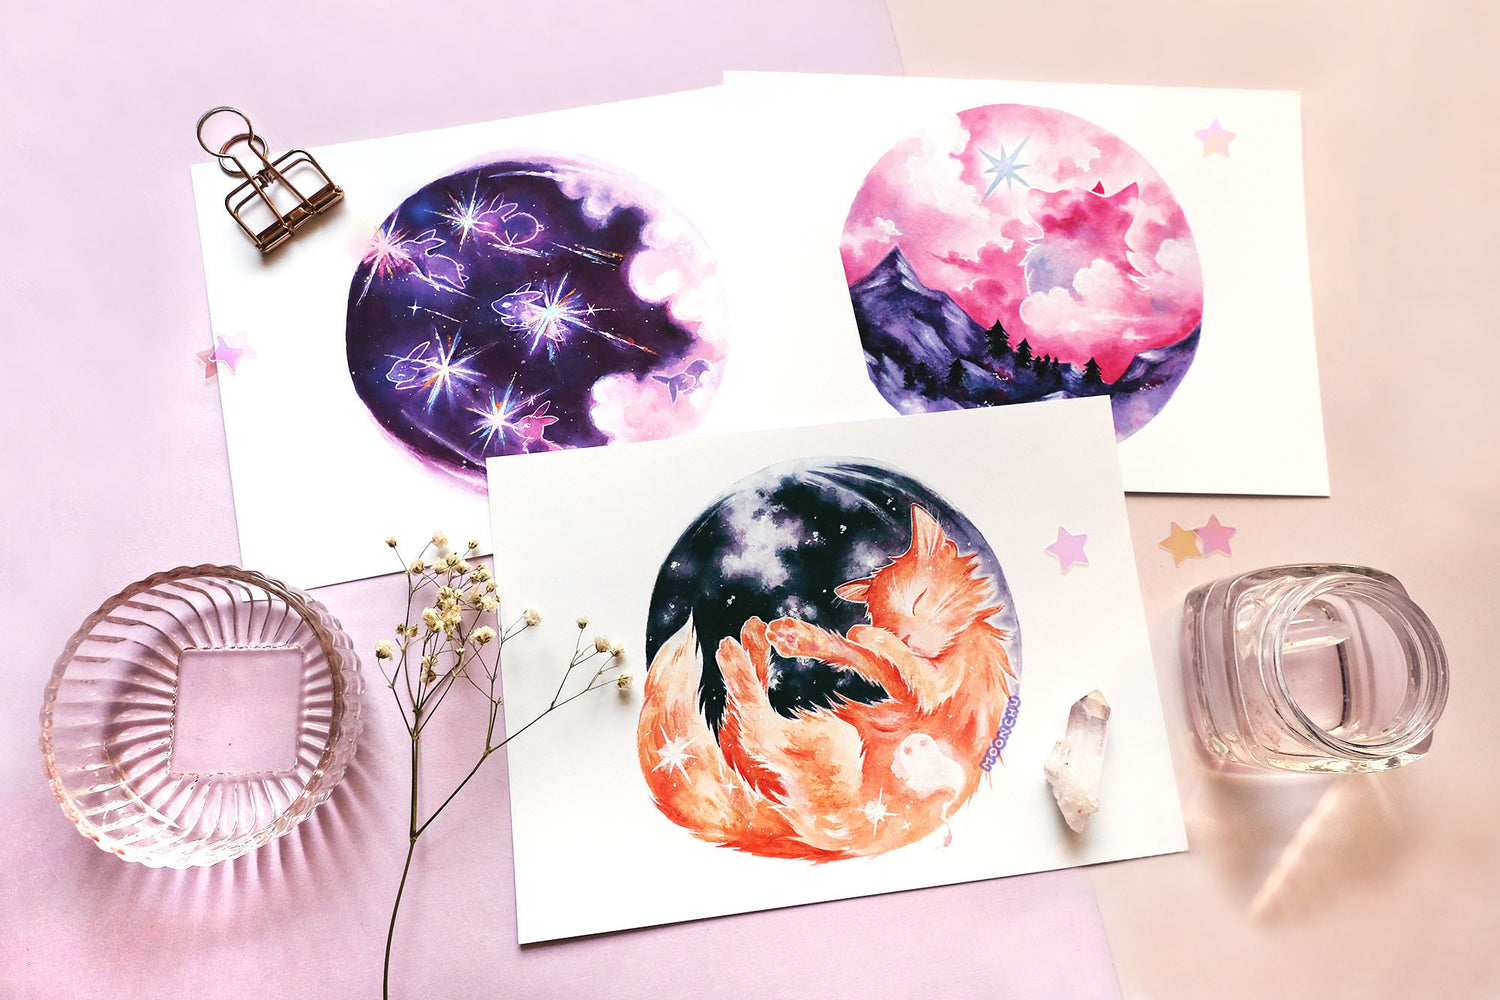 flatlay style photo of 3 original art pieces from moonchu's monthly moon series. has little stars, dried flower, and glass pieces as decor.